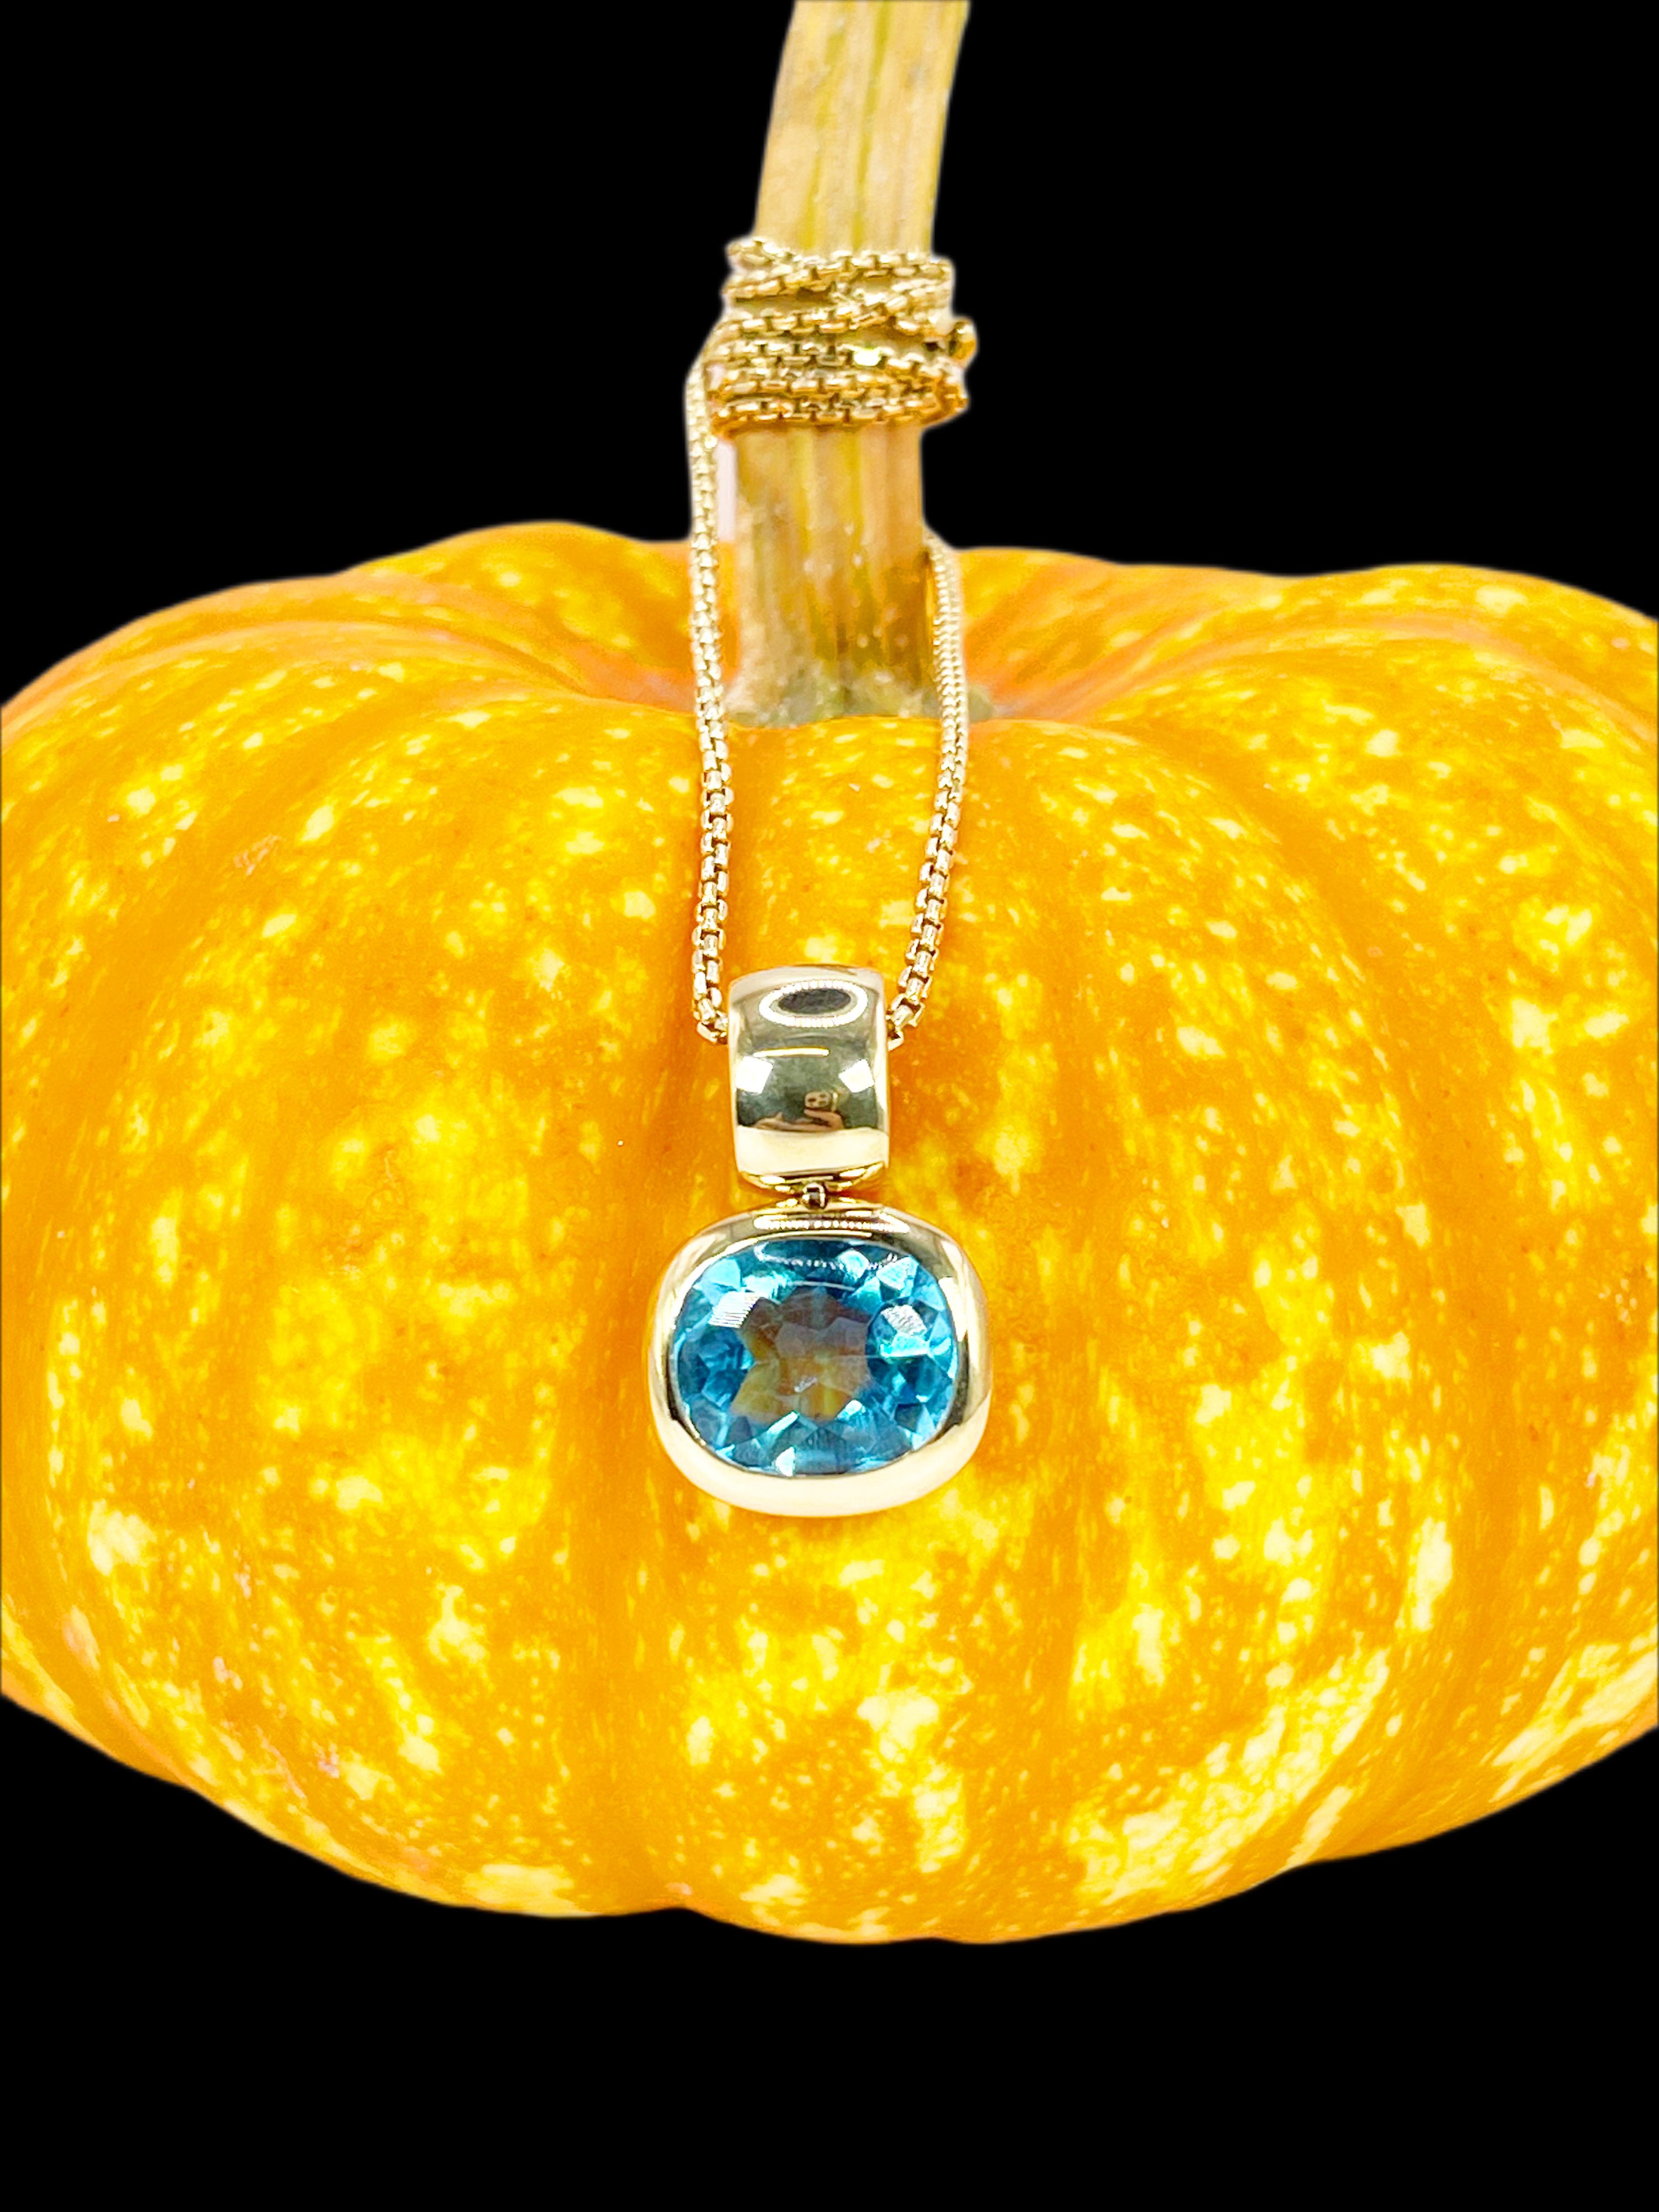 Swiss Blue Topaz Pendant Necklace 18KT Yellow Gold H. Stern 1